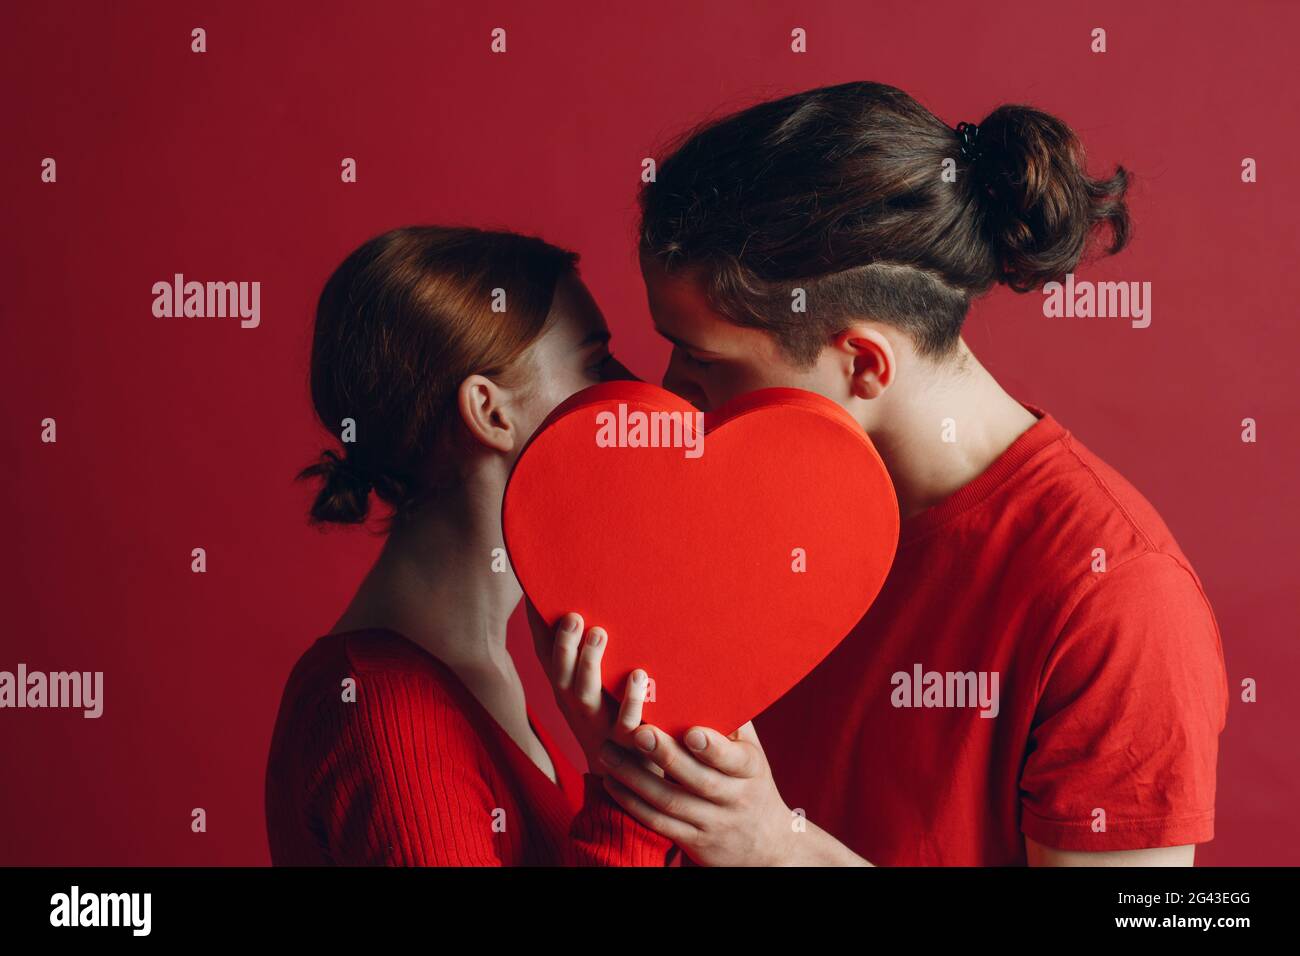 Man and woman young couple kissing and hiding behind heart-shaped box Stock Photo